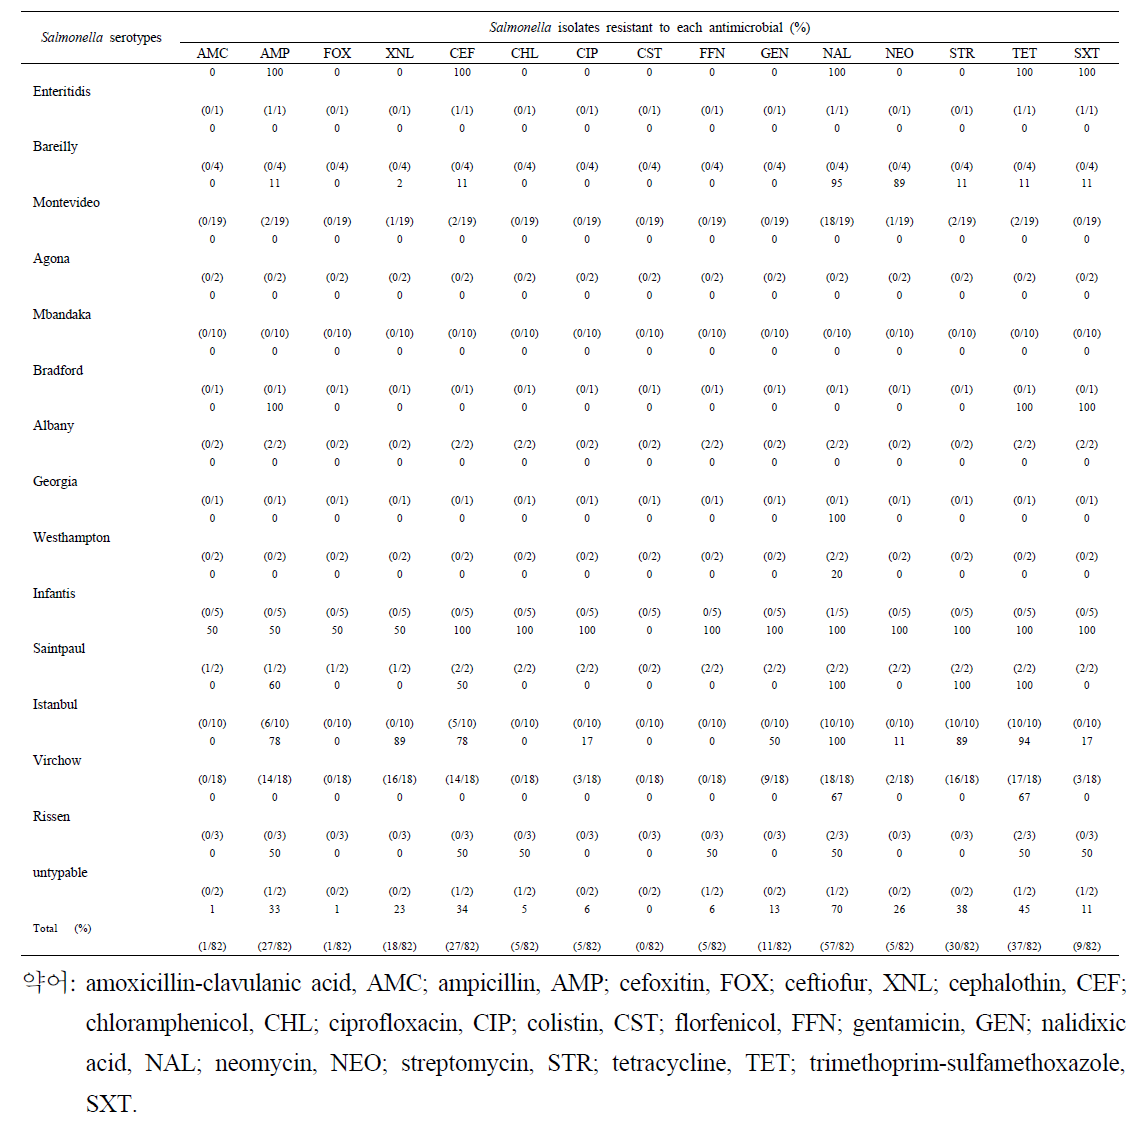 Percentage of Salmonella isolates of each serotype resistant to each antimicrobial